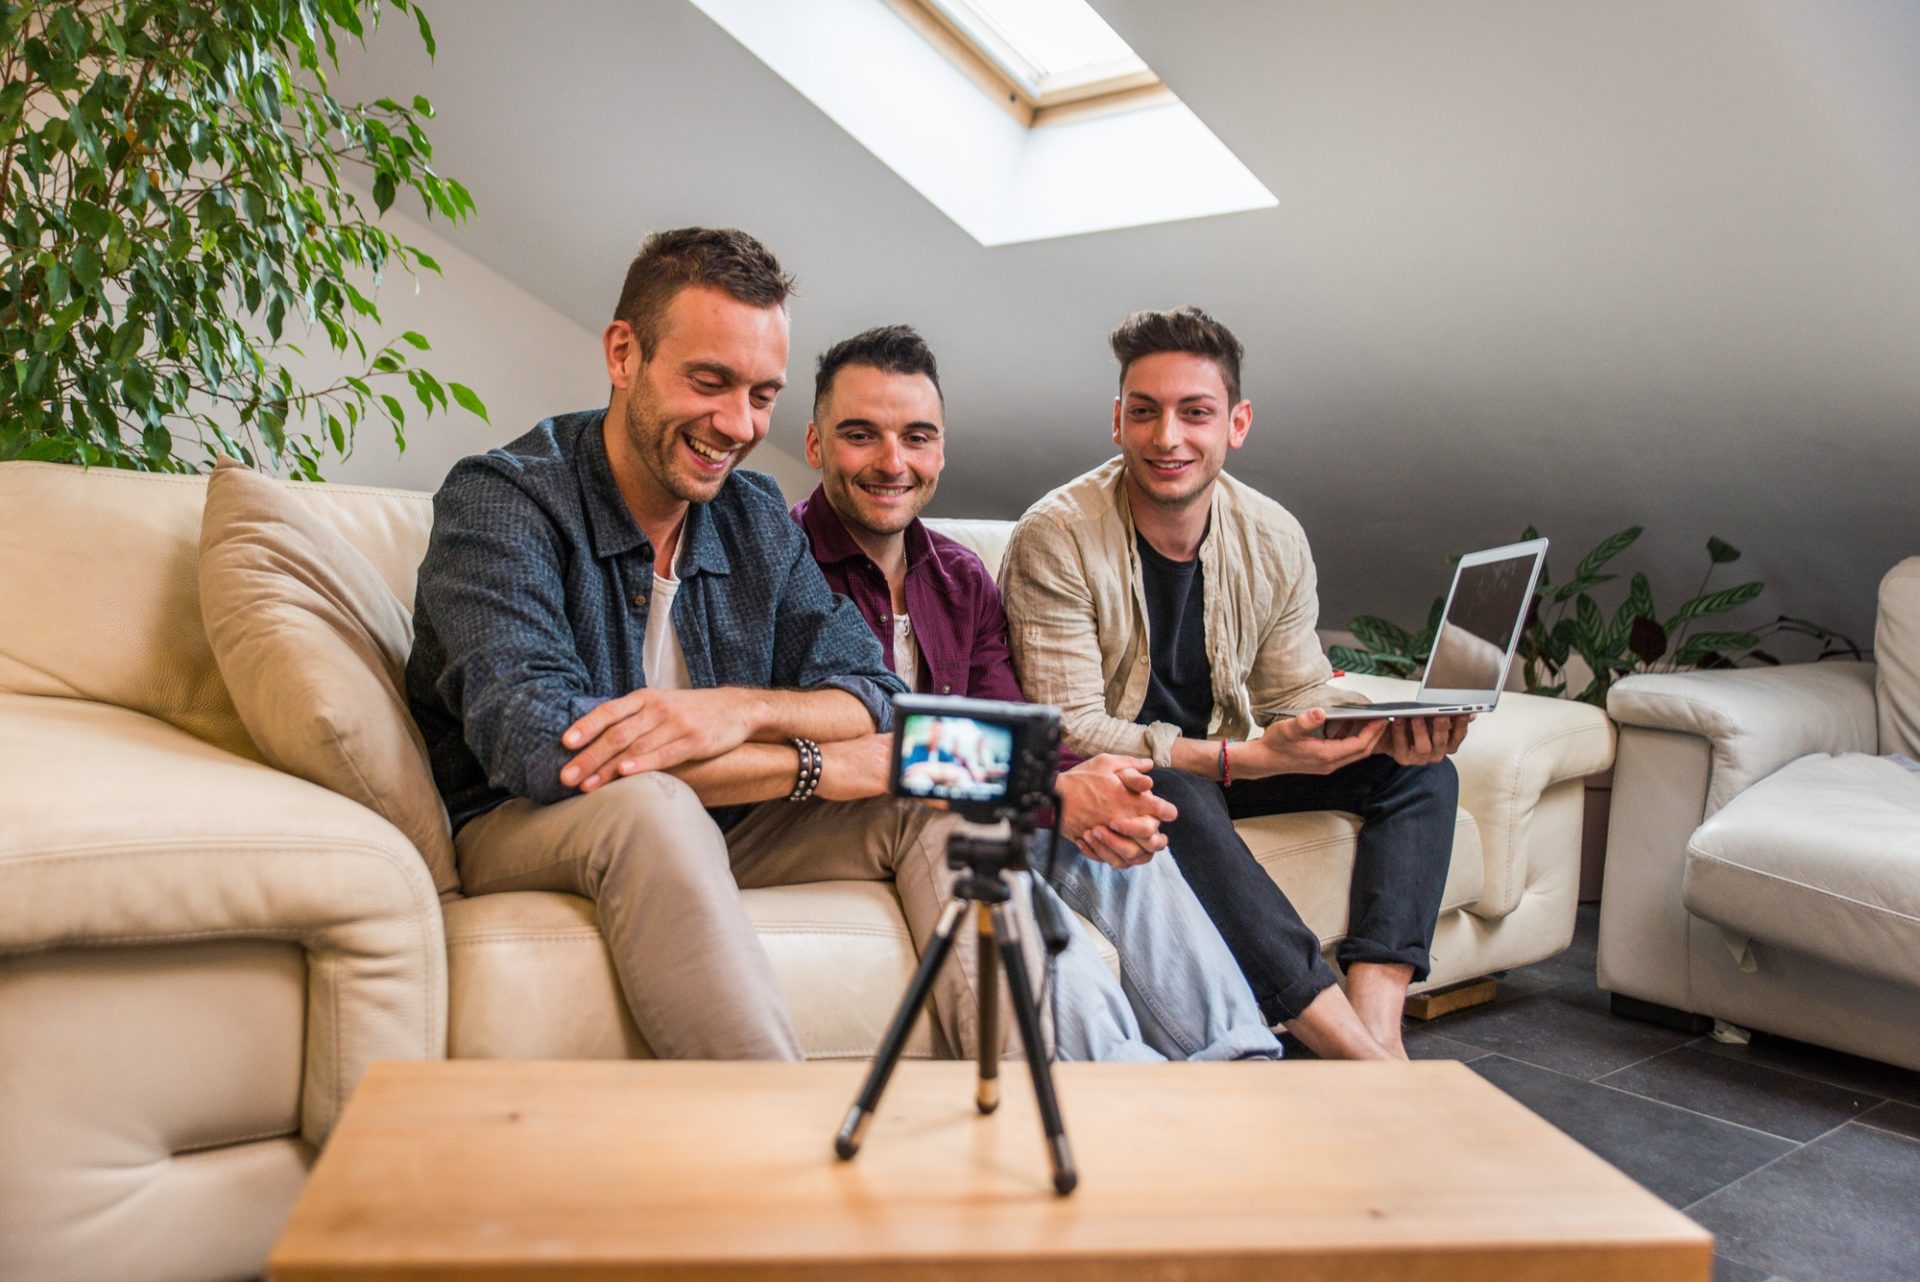 Influencers vlogging from home